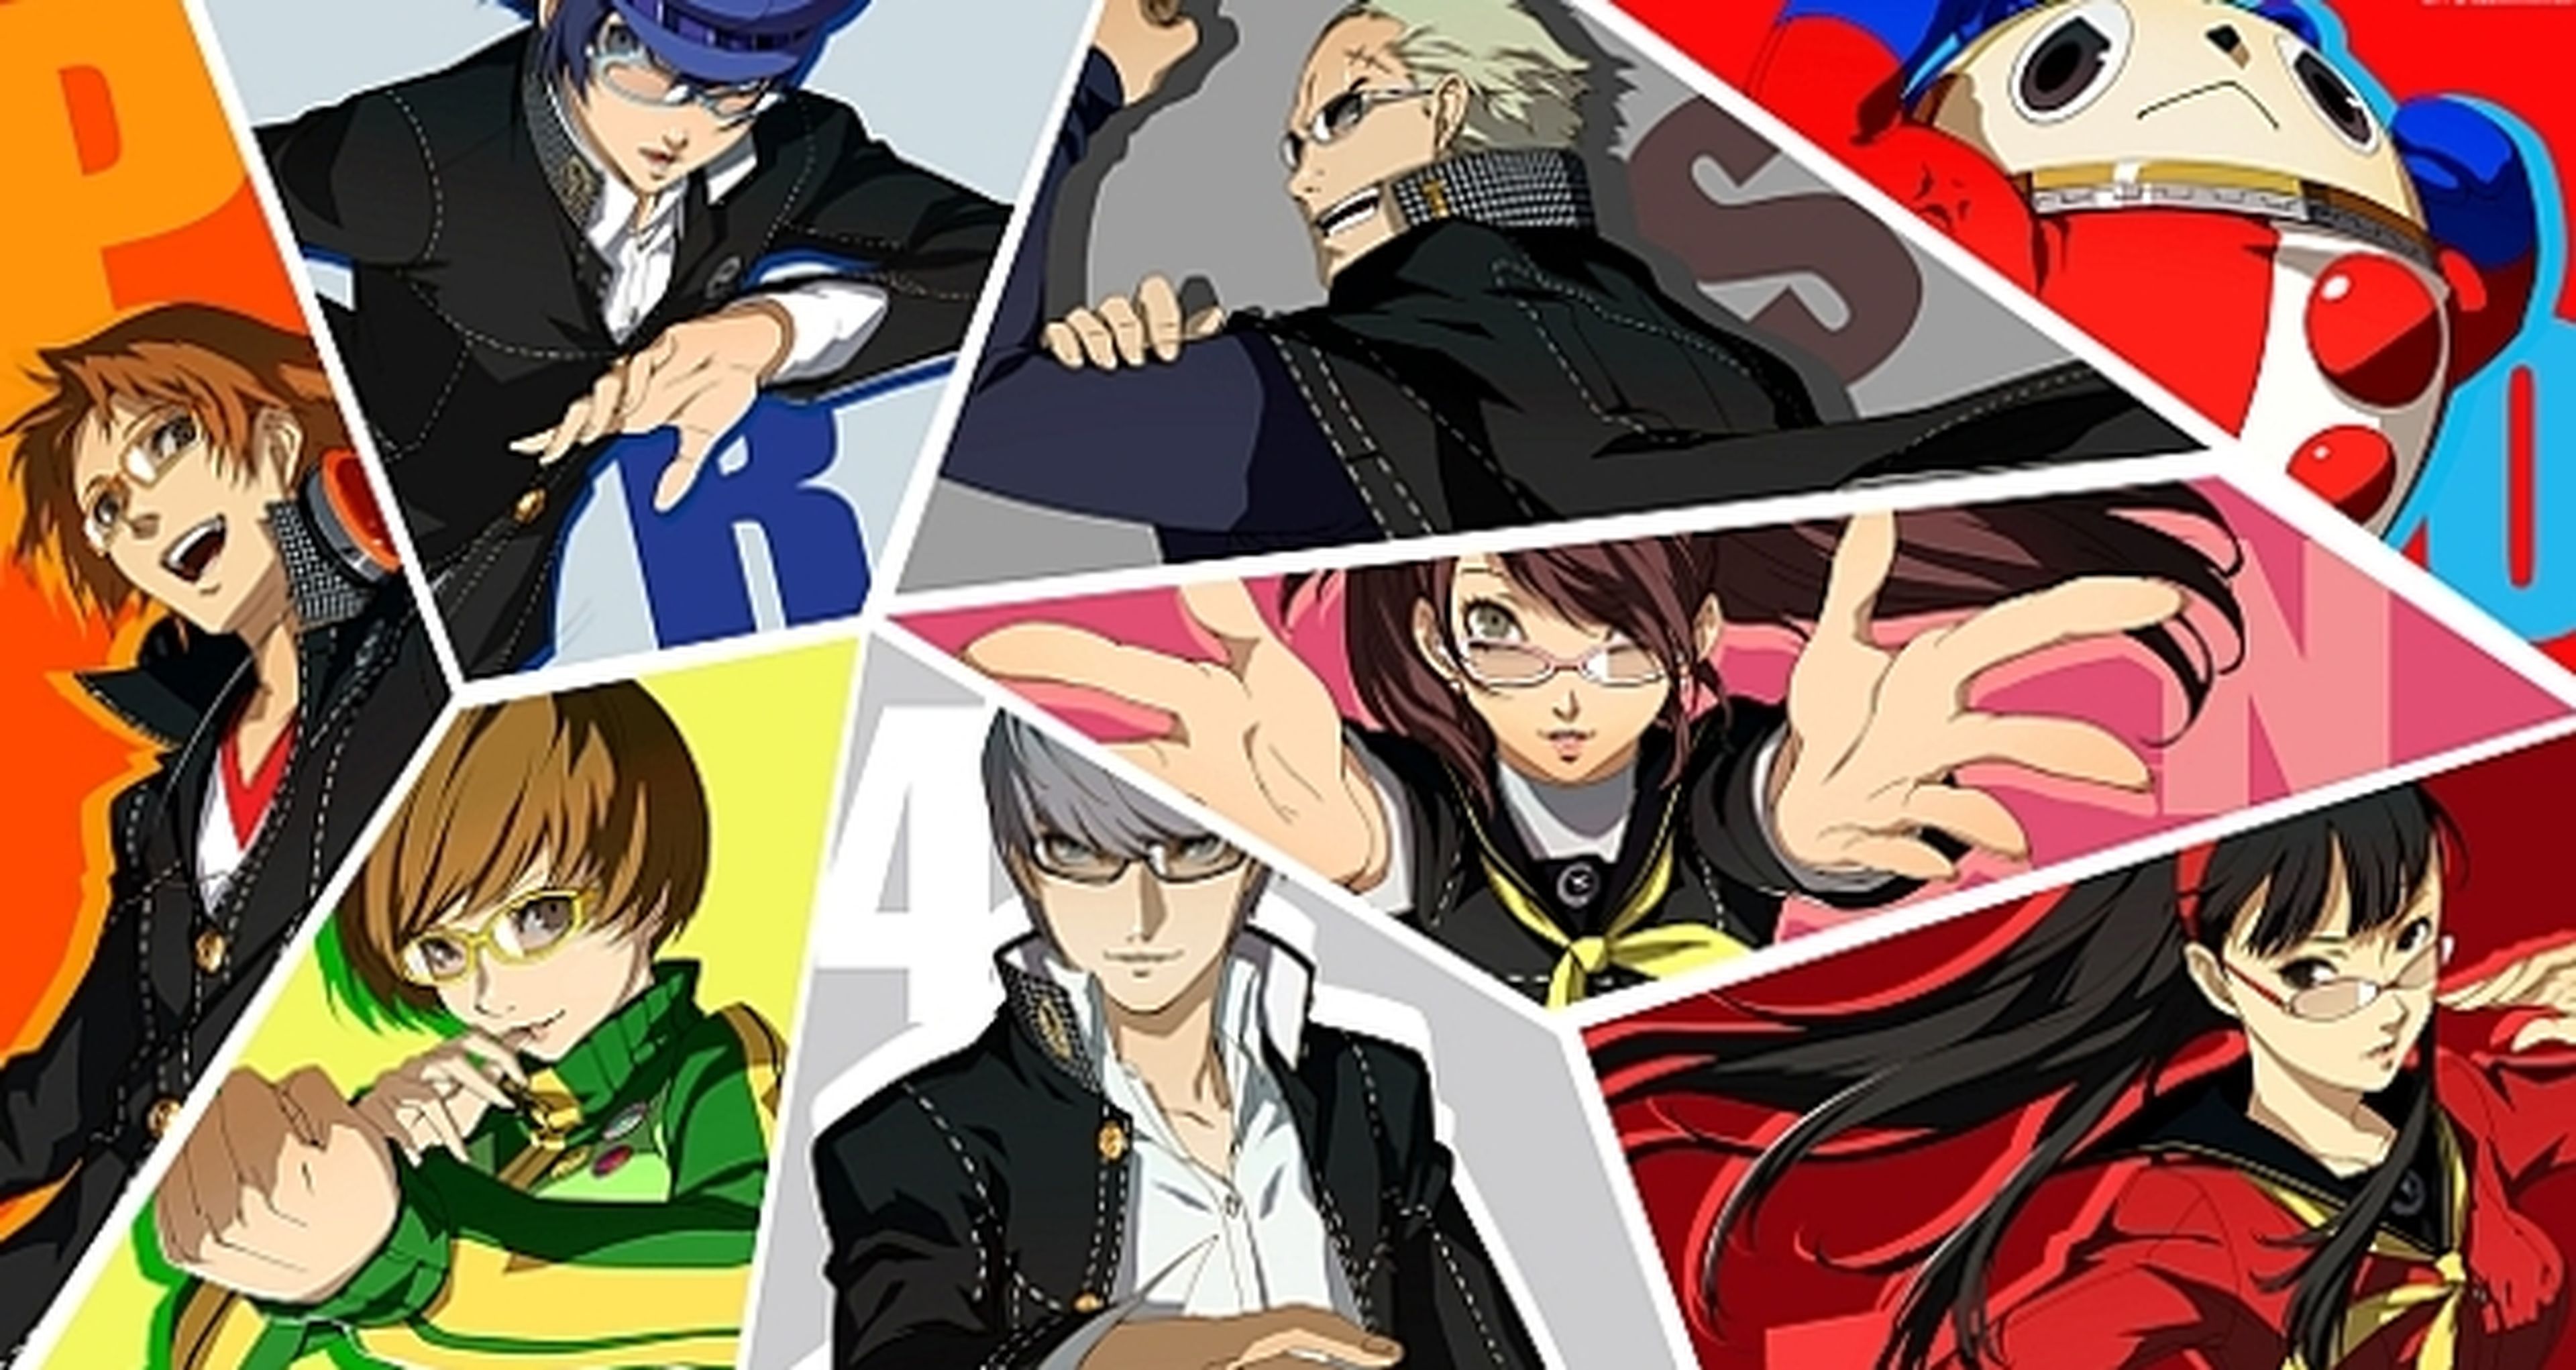 TGS 2012: Persona 4 The Golden rumbo a Europa